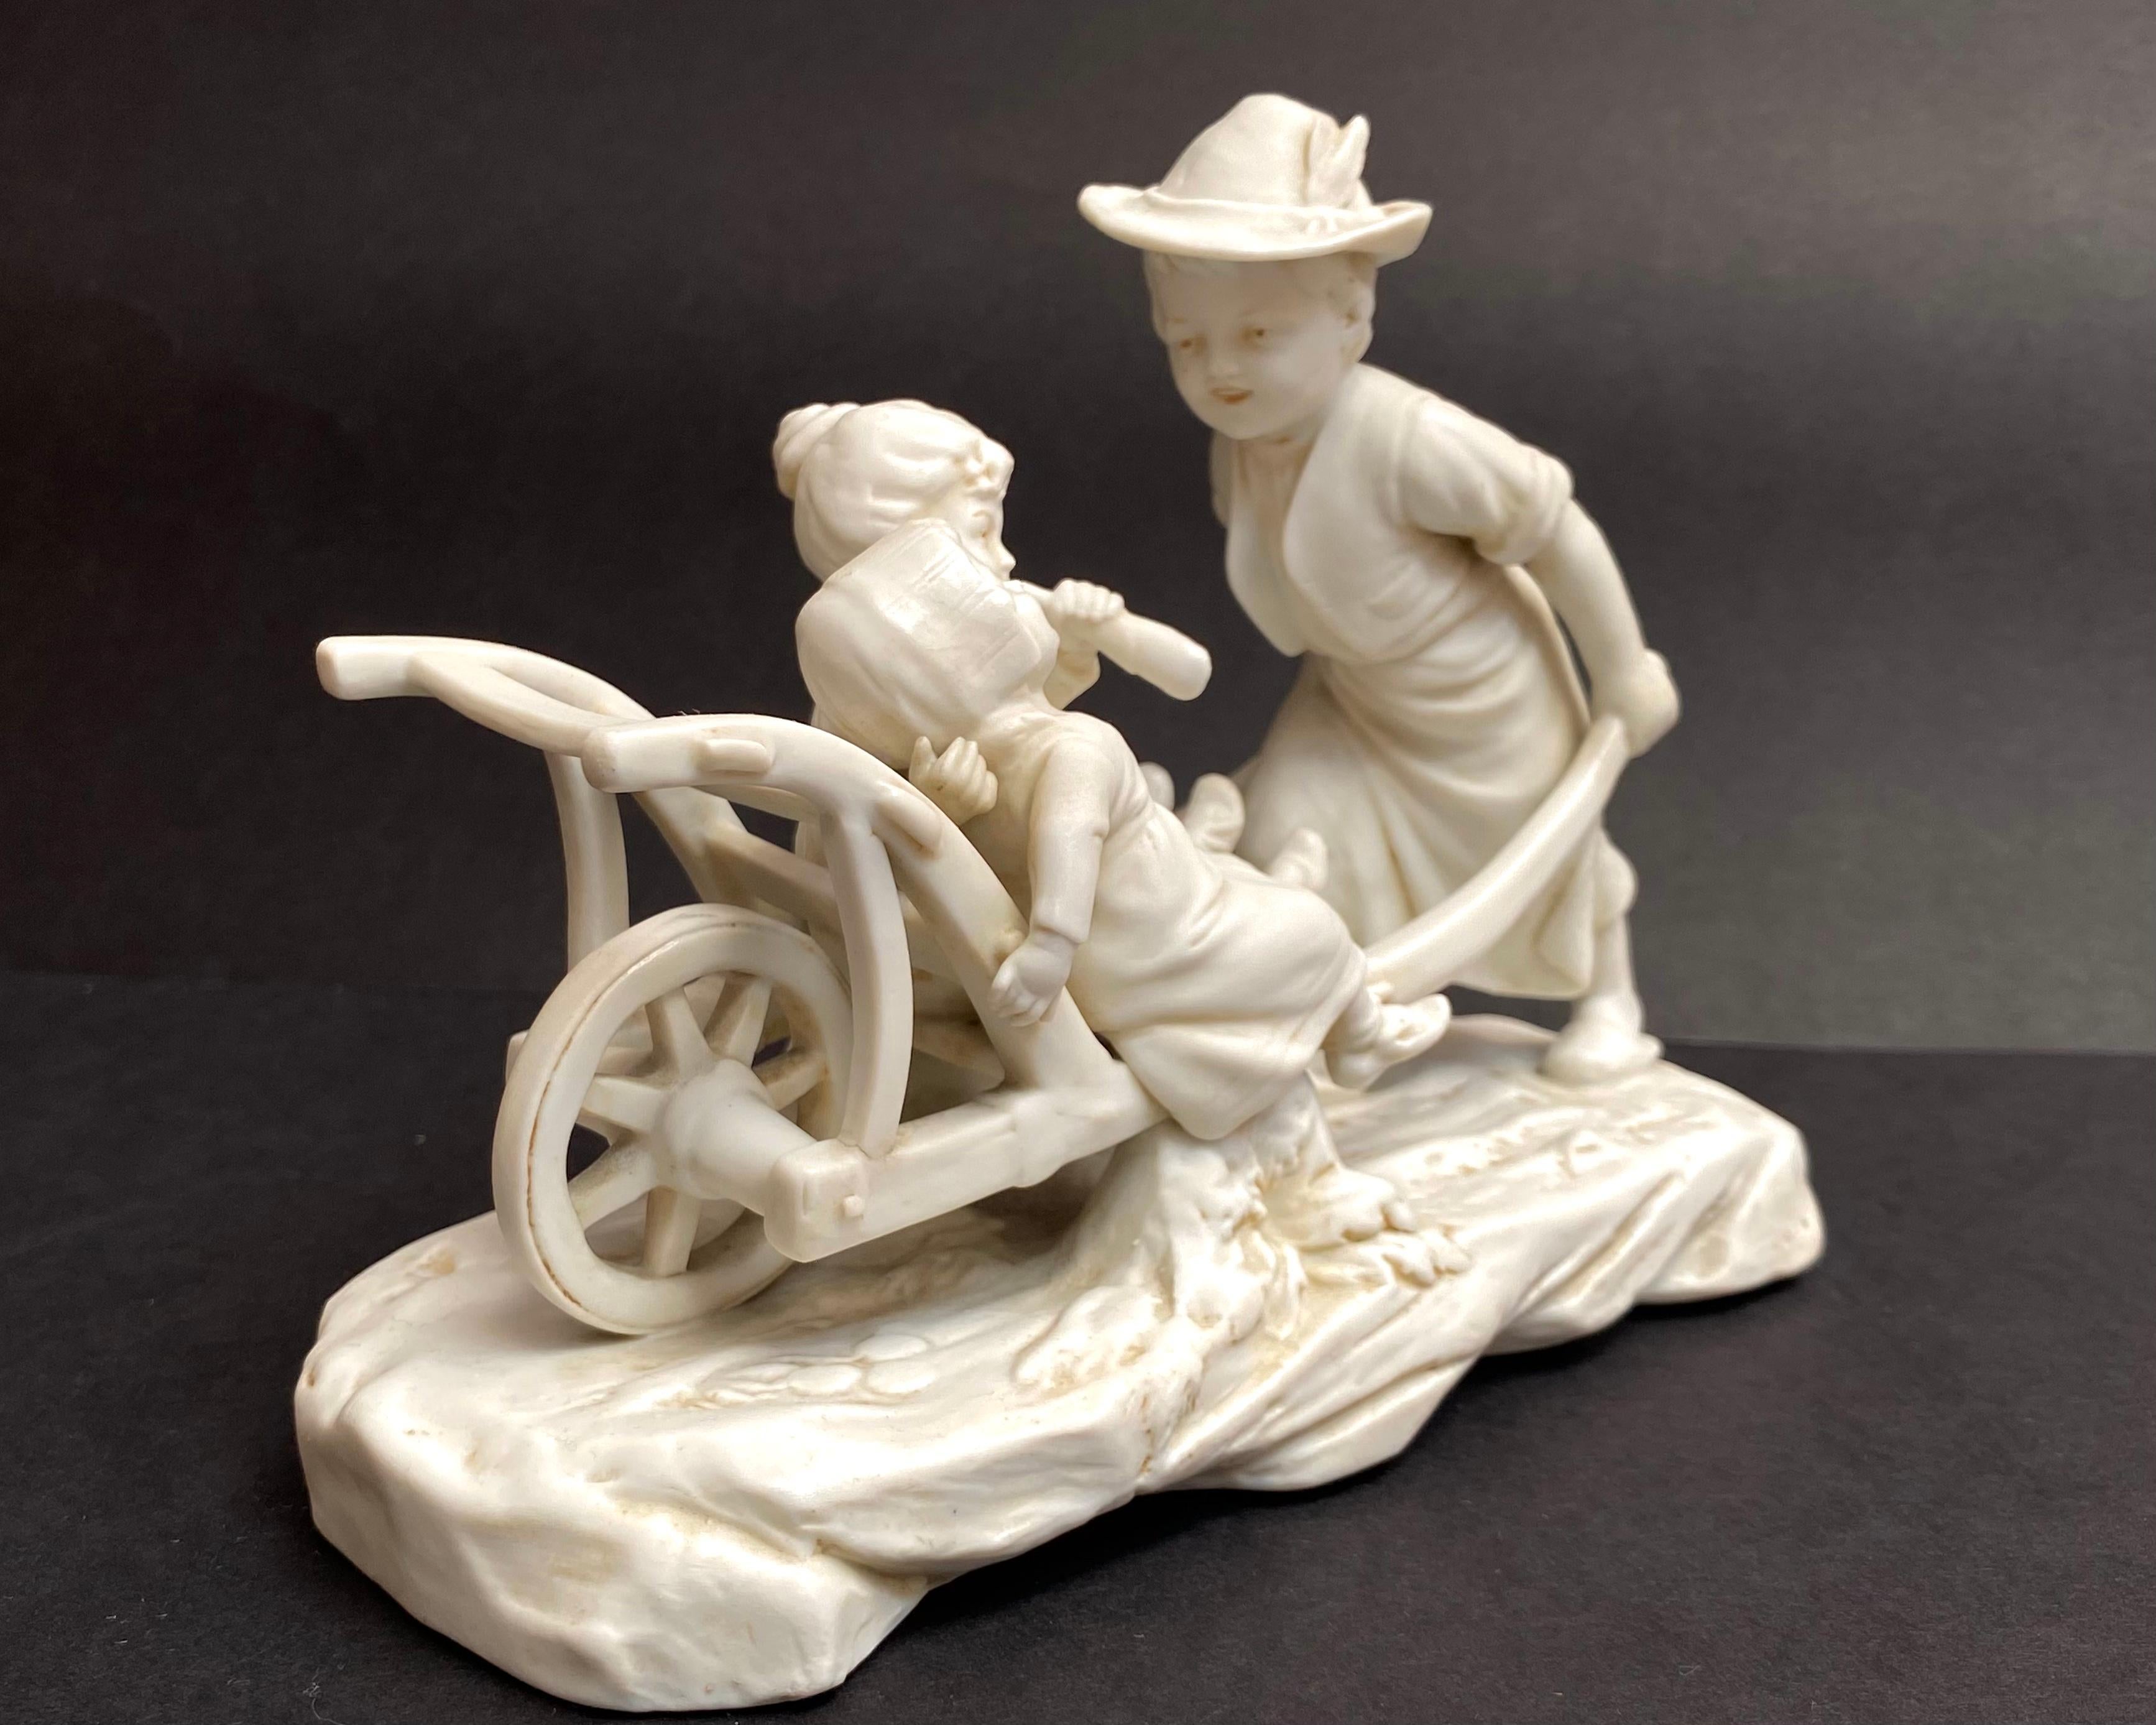 The highly detailed German biscuit porcelain figurine. 

Early 20th century.

Very rare and outstanding hard-to-find figurine. This beautiful piece features Lady Pulling Cart with Two Girls. It has the finest detail.

Skillfully traced details